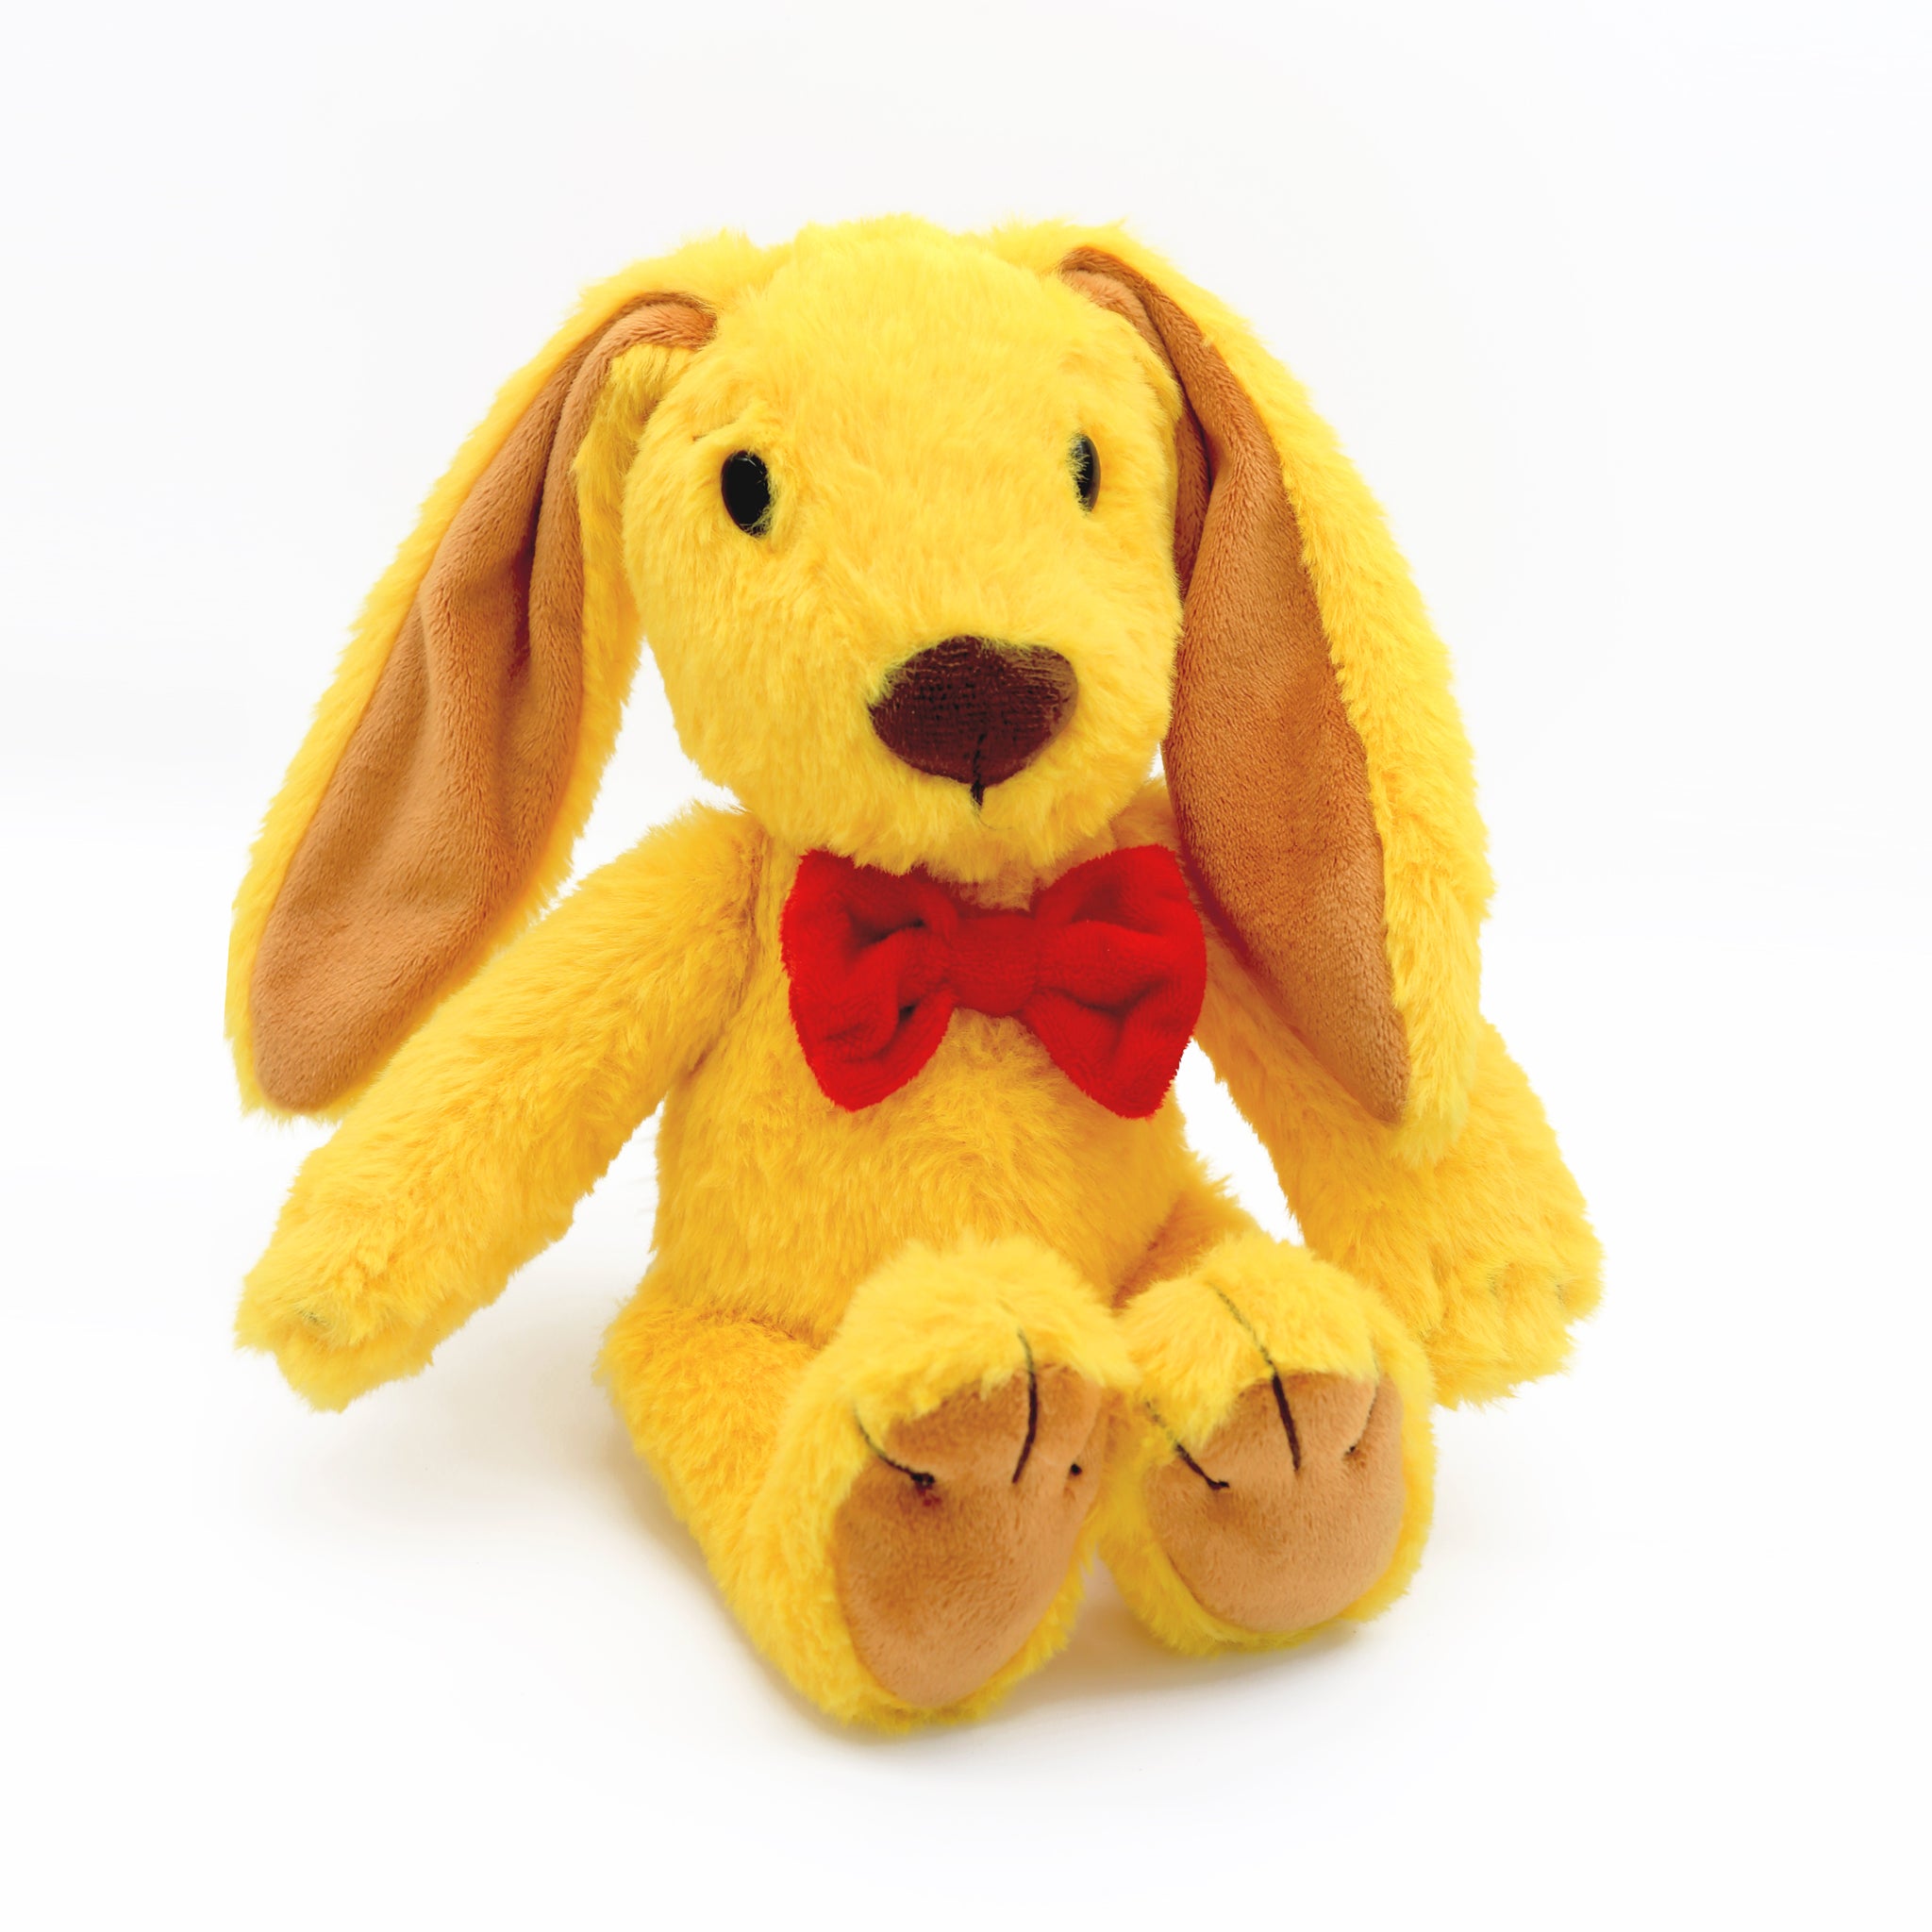 Zeke's Bunny Abacus: The Yellow Stuffed Plush has short fuzzy fur and is soft to the touch and is machine washable